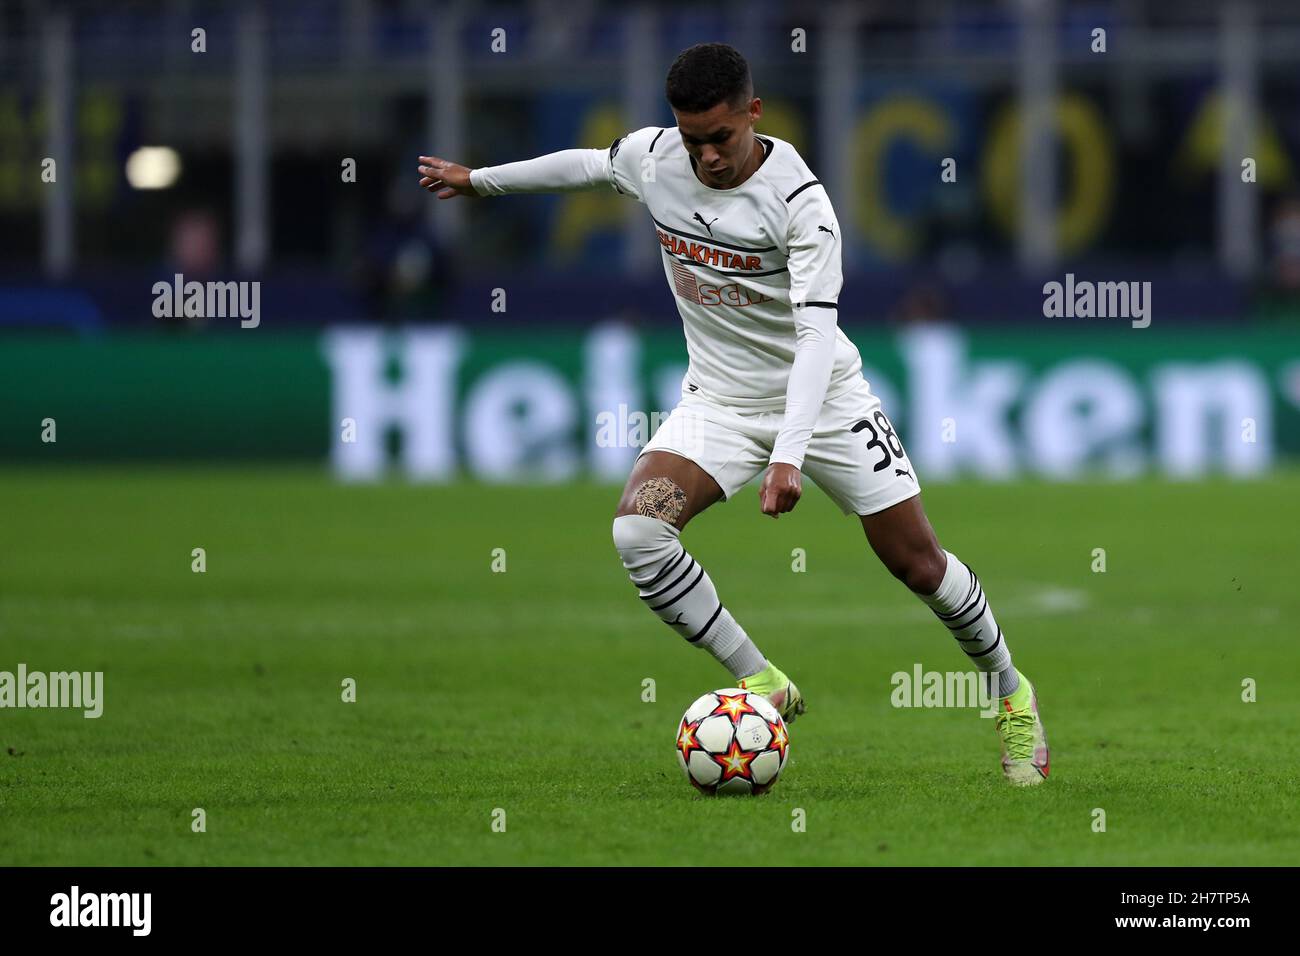 Milan, Italy. 24th Nov, 2021. Pedrinho  of FC Shakhtar Donetsk  controls the ball during the UEFA Champions League group D match between FC Internazionale and Shakhtar Donetsk . Credit: Marco Canoniero/Alamy Live News Stock Photo